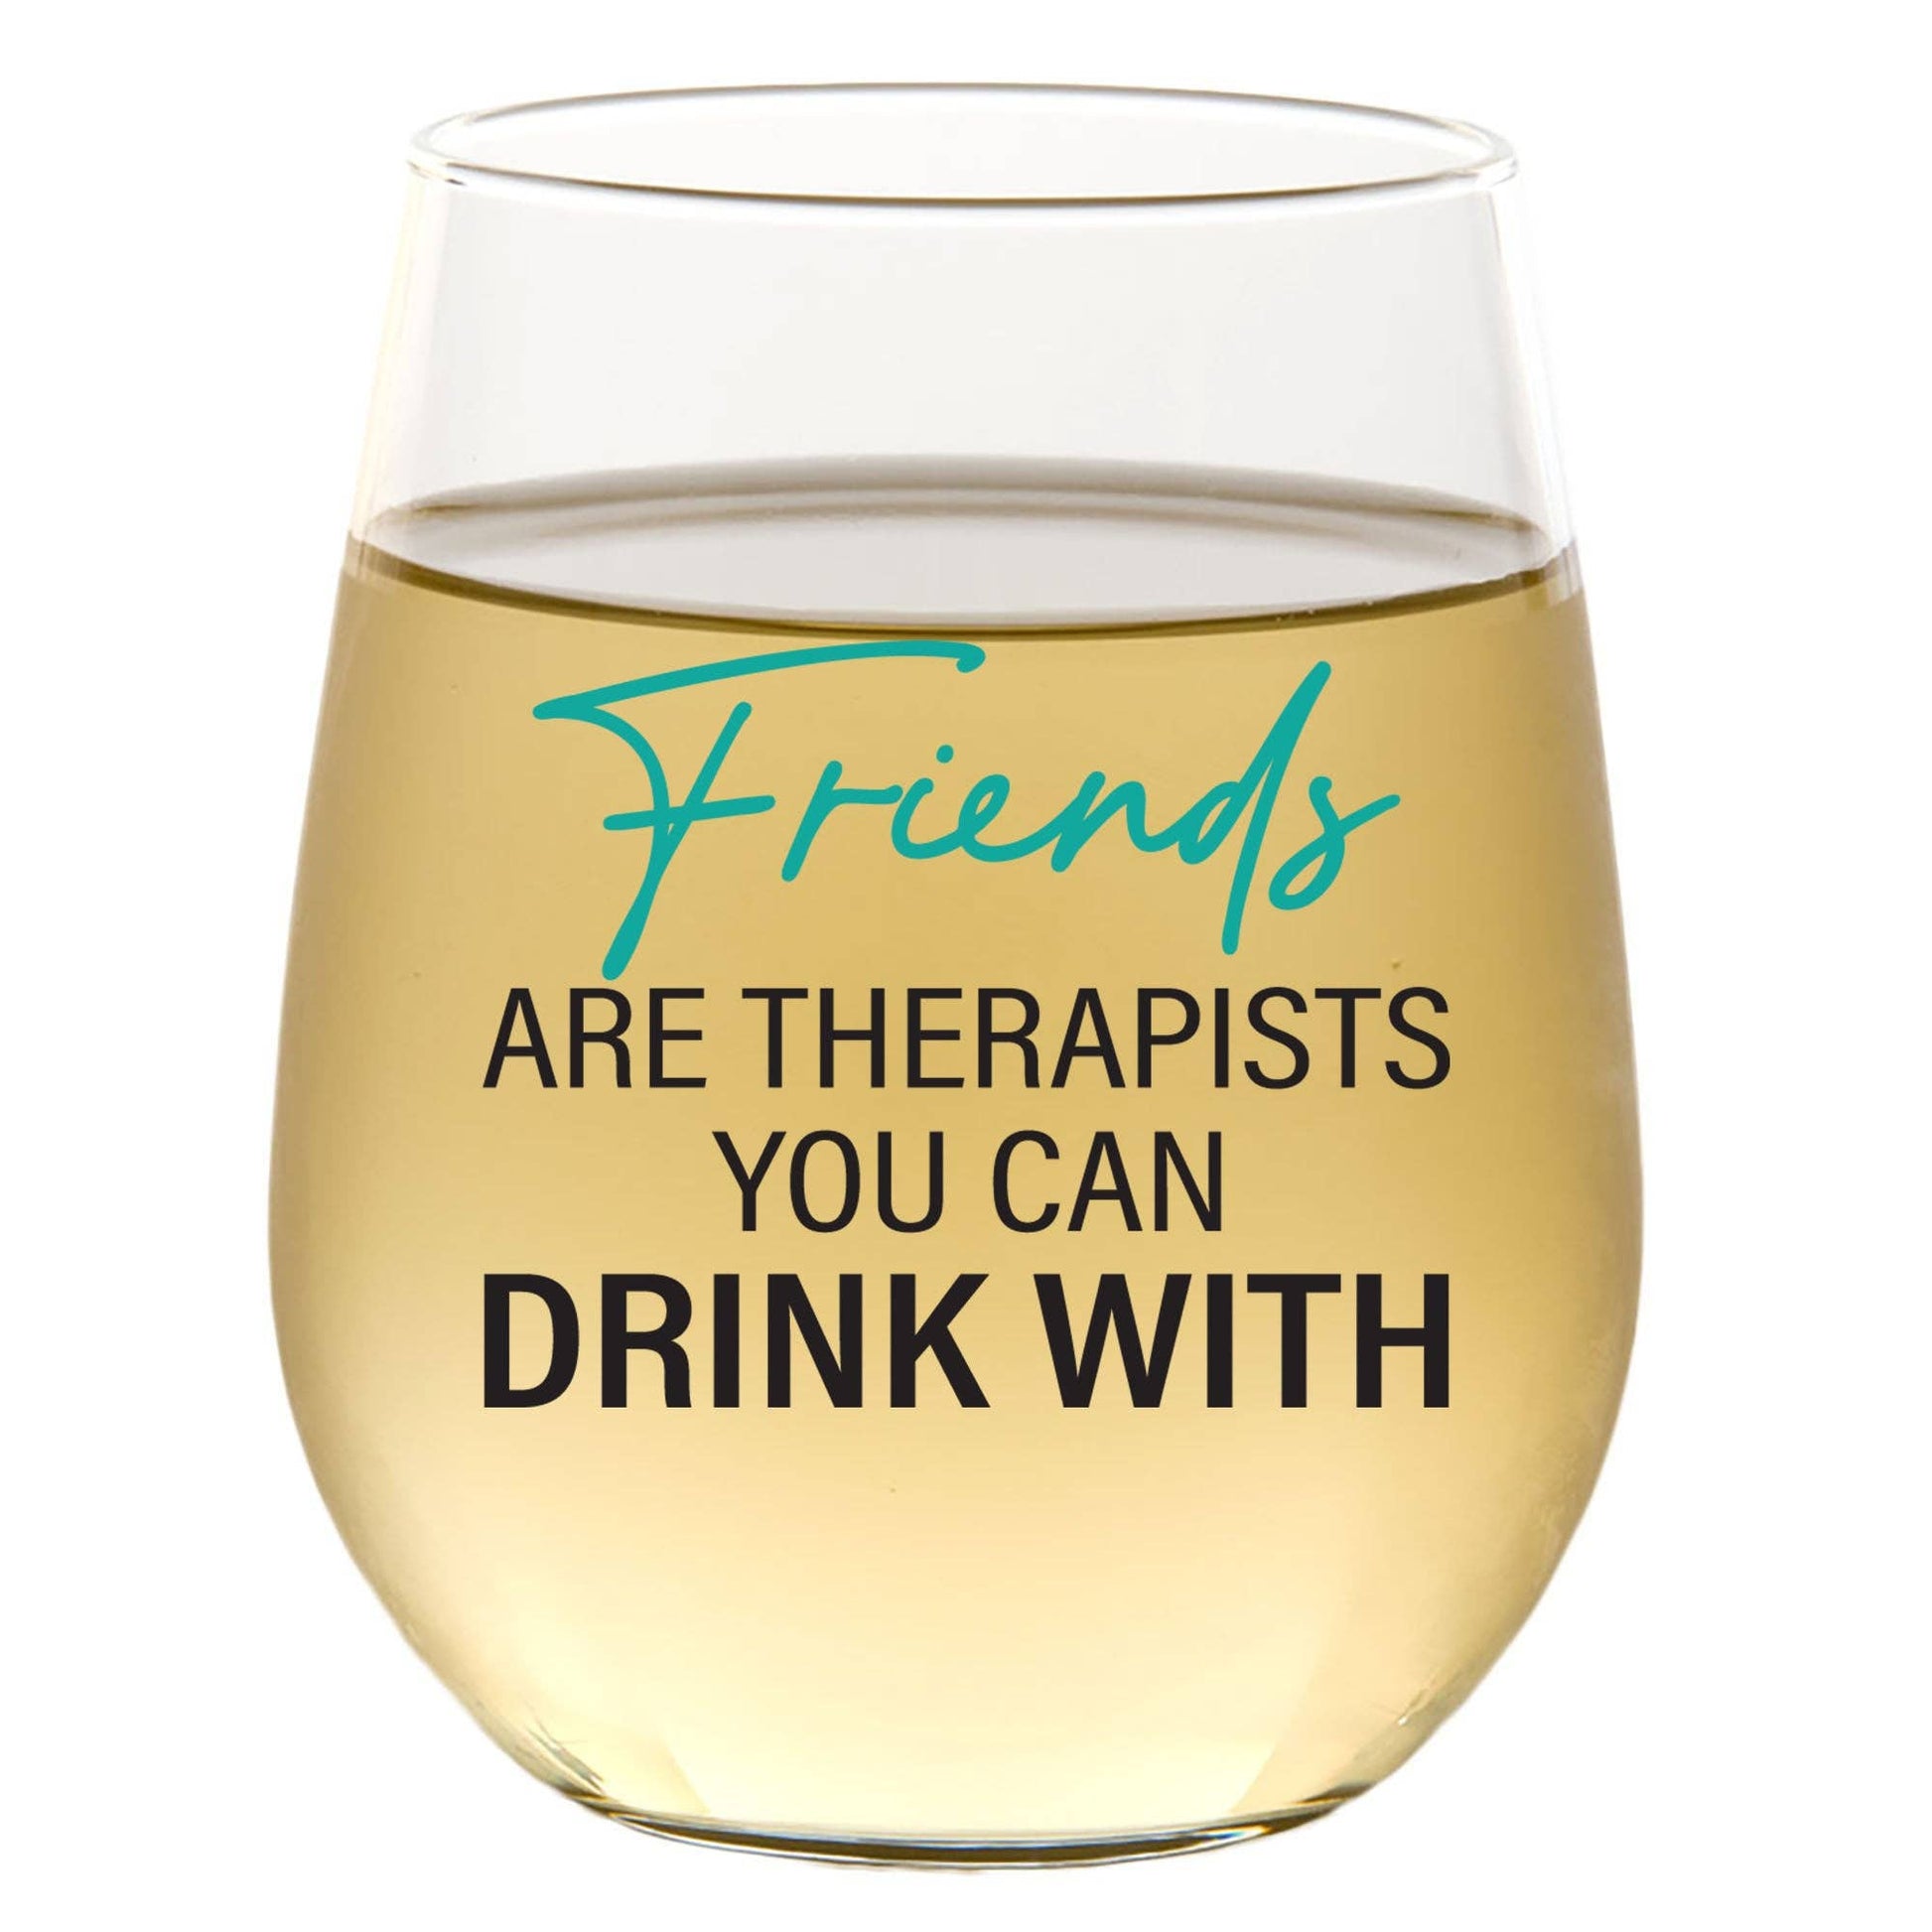 Friends are Therapists You Can Drink With 15oz Wine Glass Core Cedar Crate Market